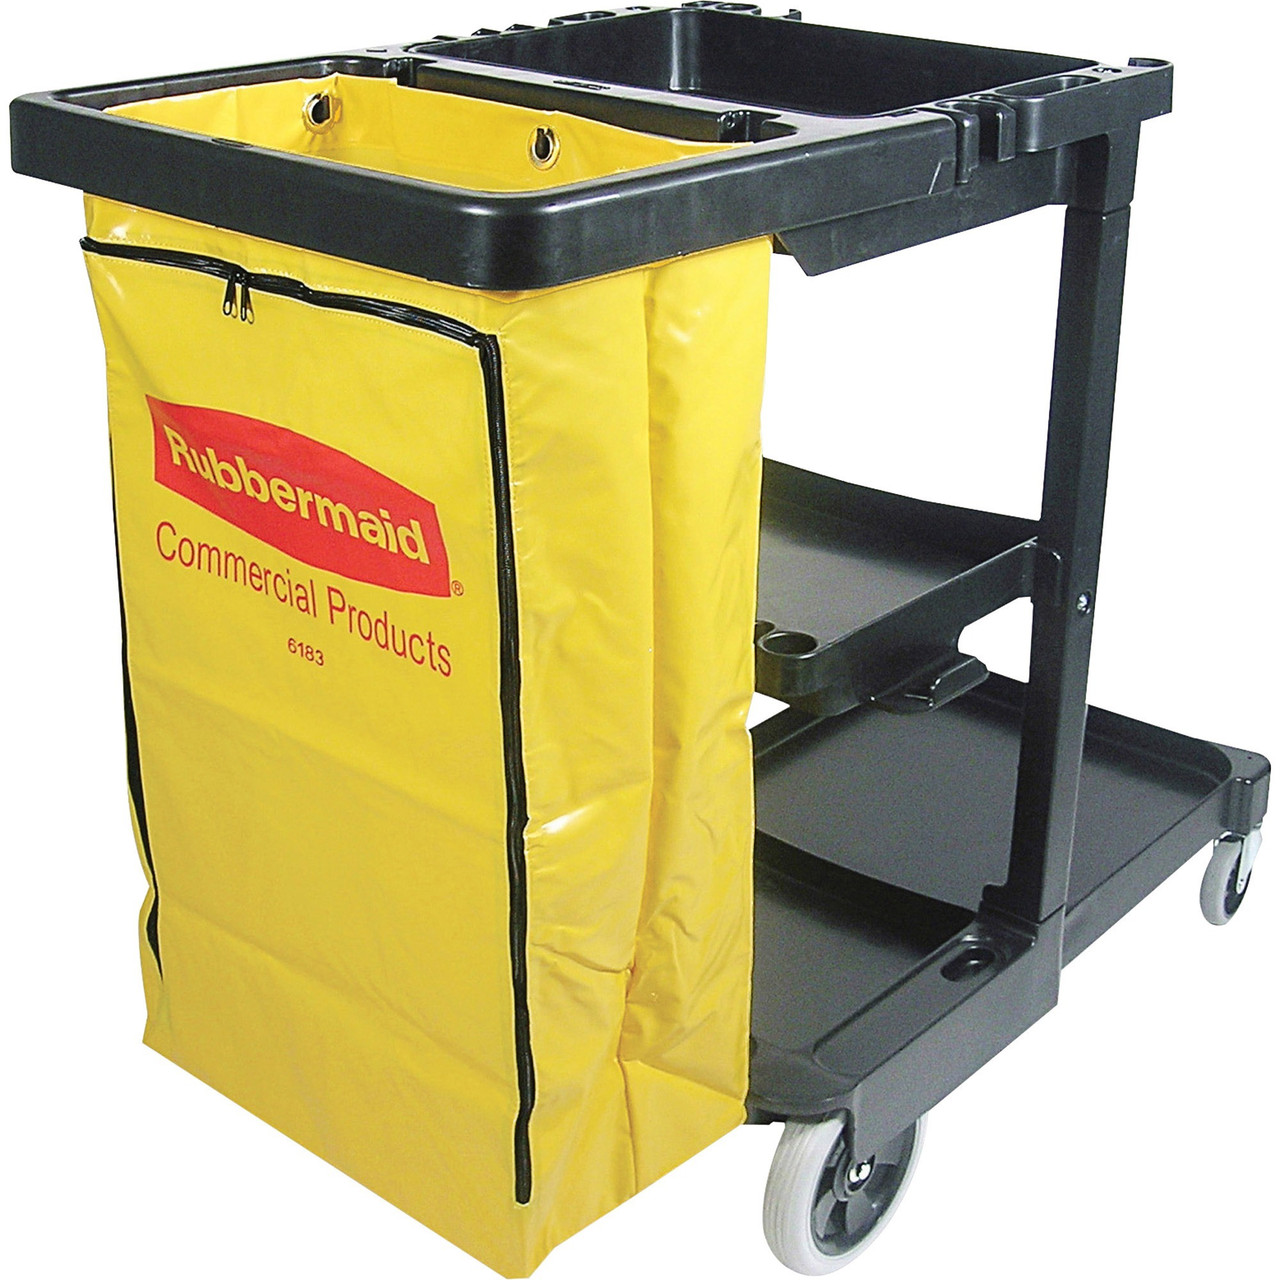 Rubbermaid Commercial 1966719 24 Gallon Zippered Vinyl Cleaning Cart Bag (Yellow)